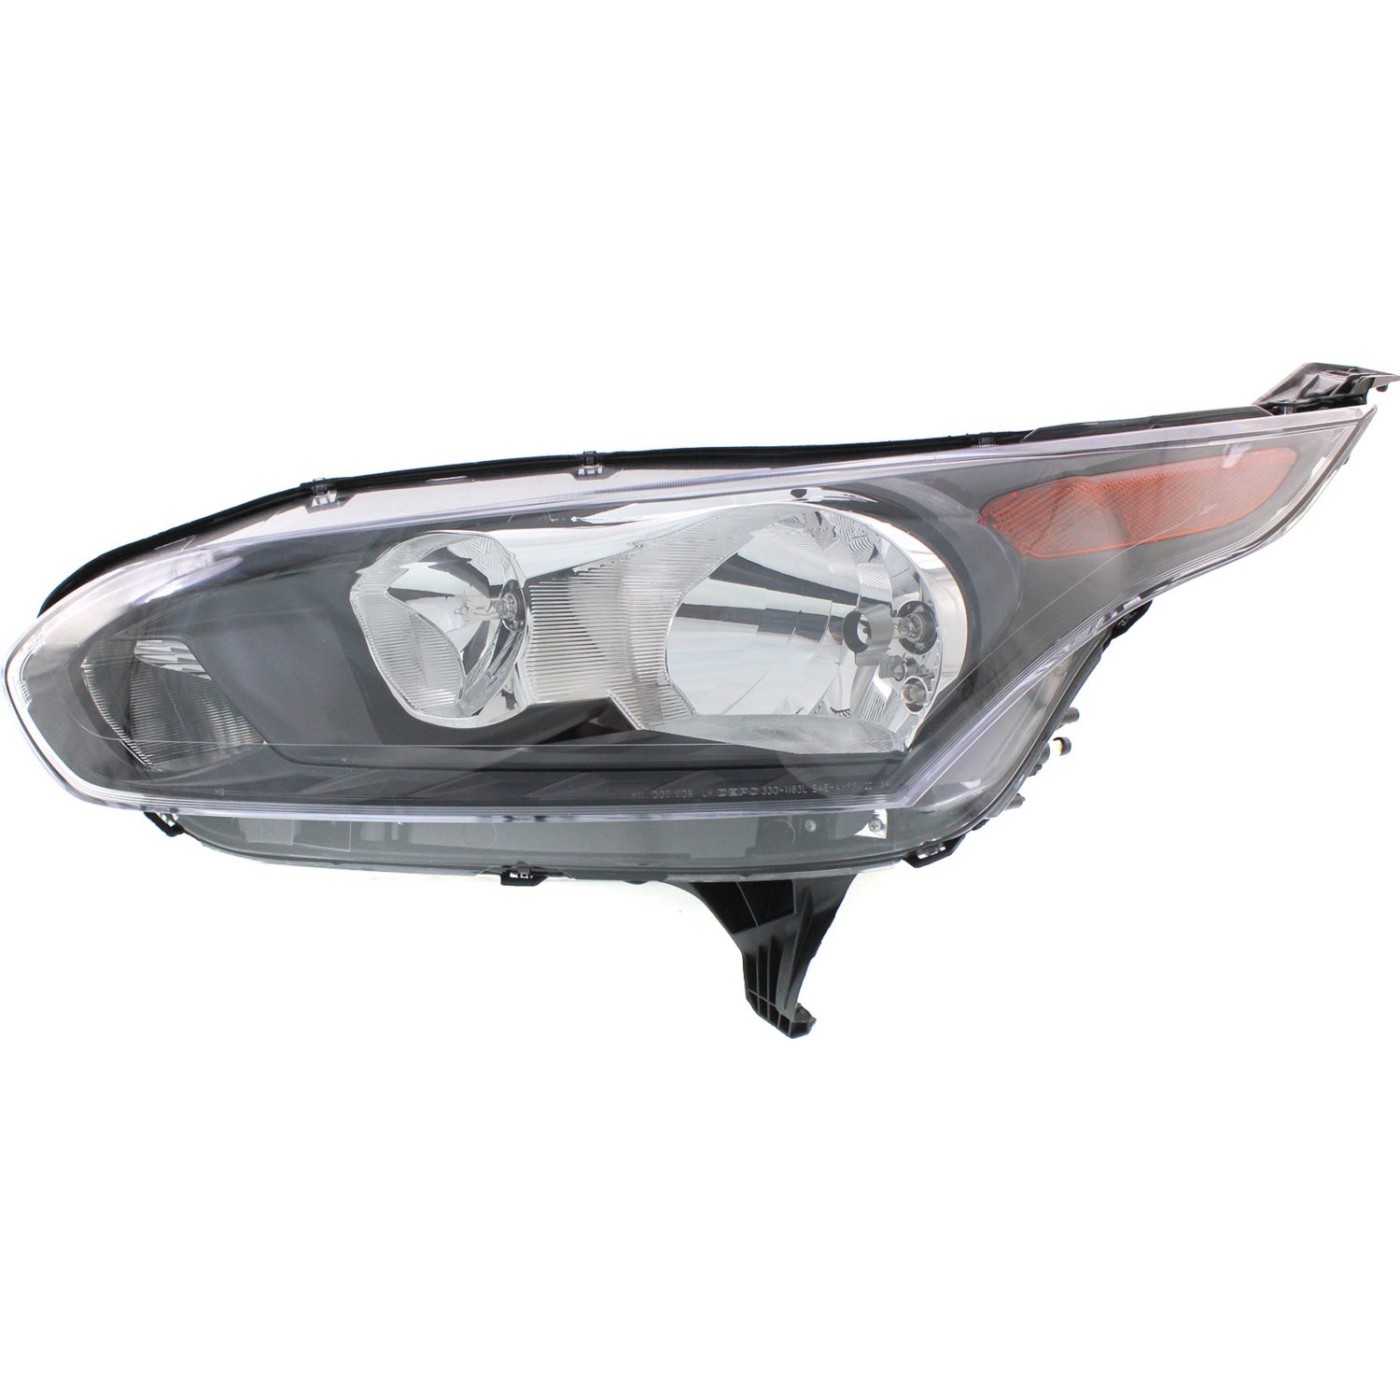 Headlight Set For 2014-2017 Ford Transit Connect Left and Right With 2017 Ford E450 Headlight Bulb Replacement